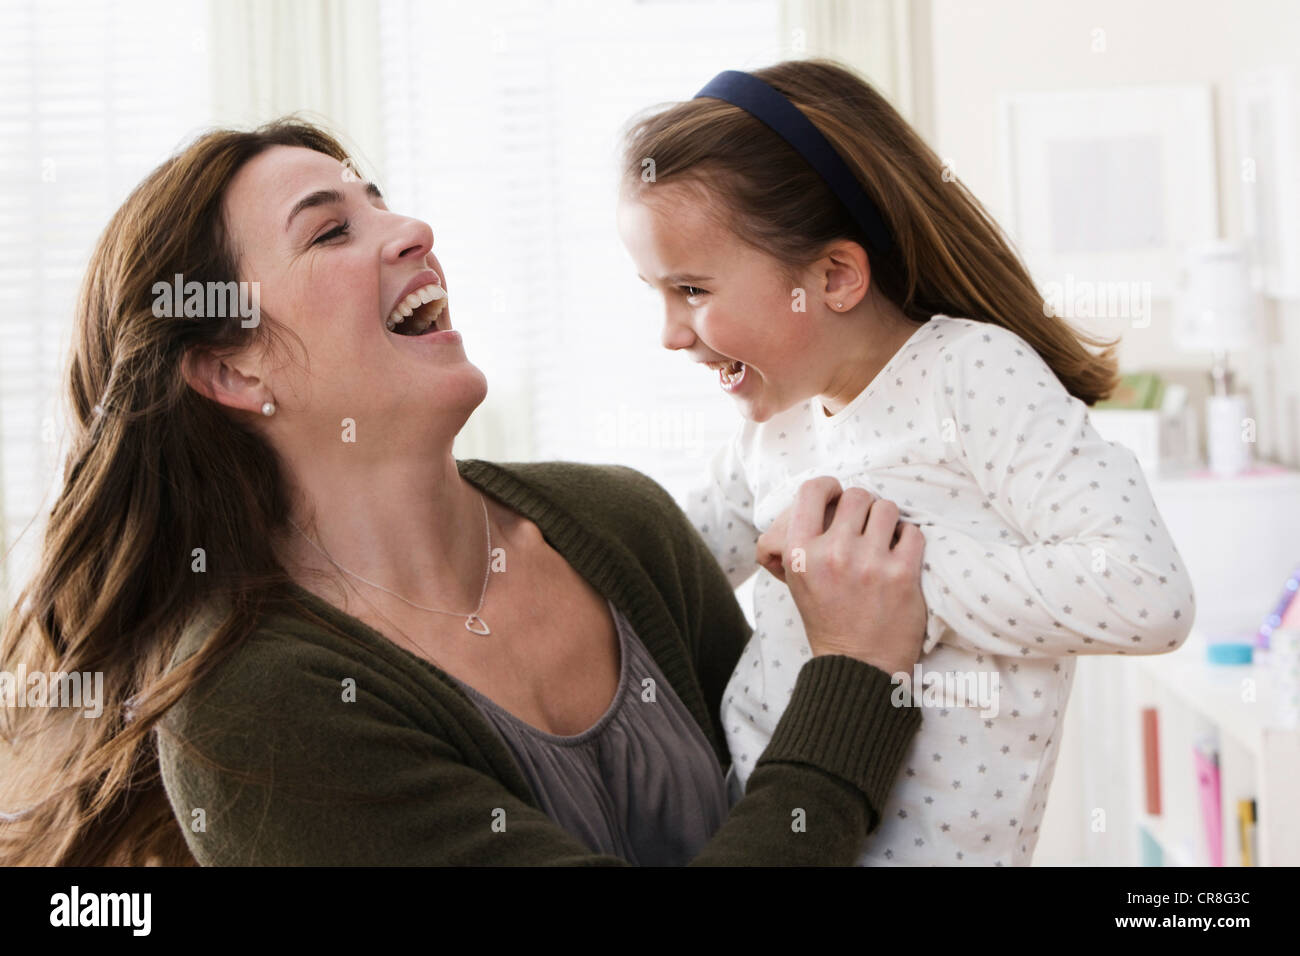 Mid adult woman holding daughter, smiling Stock Photo